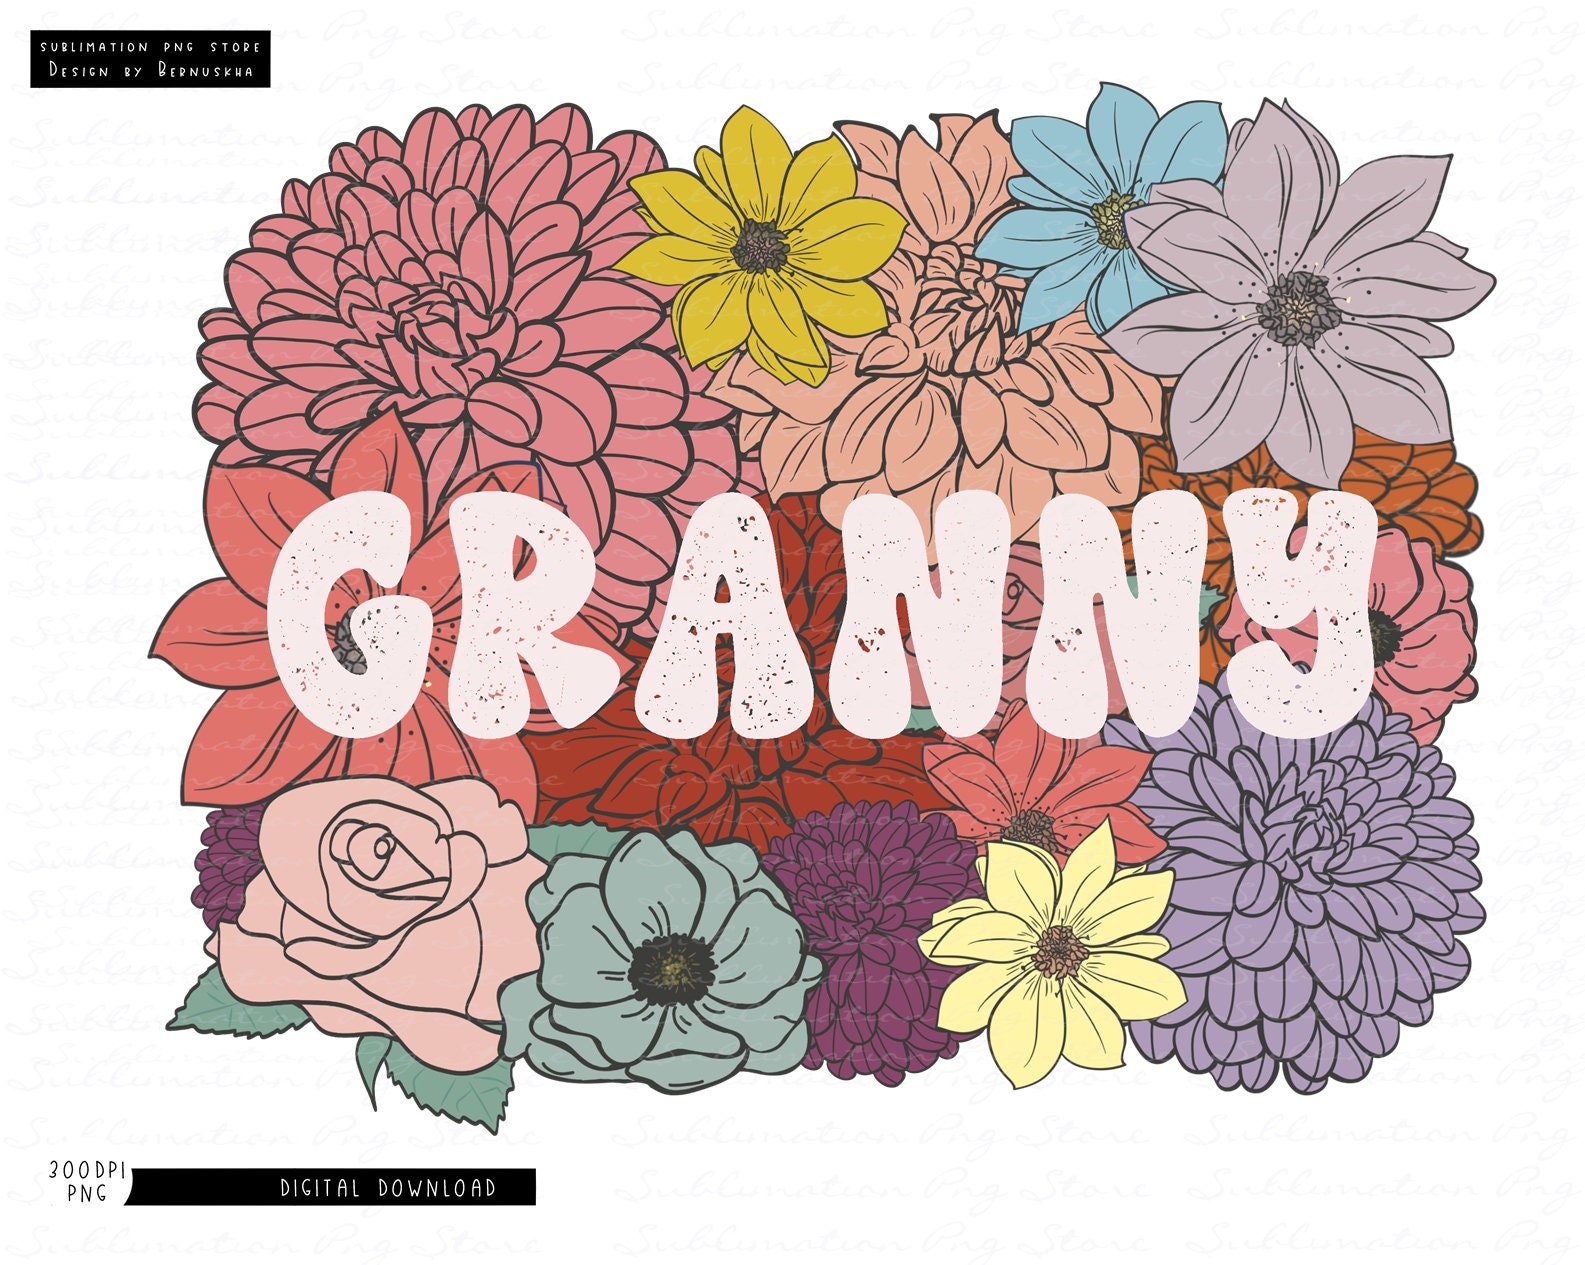 abhisekh swain recommends granny on granny tumblr pic